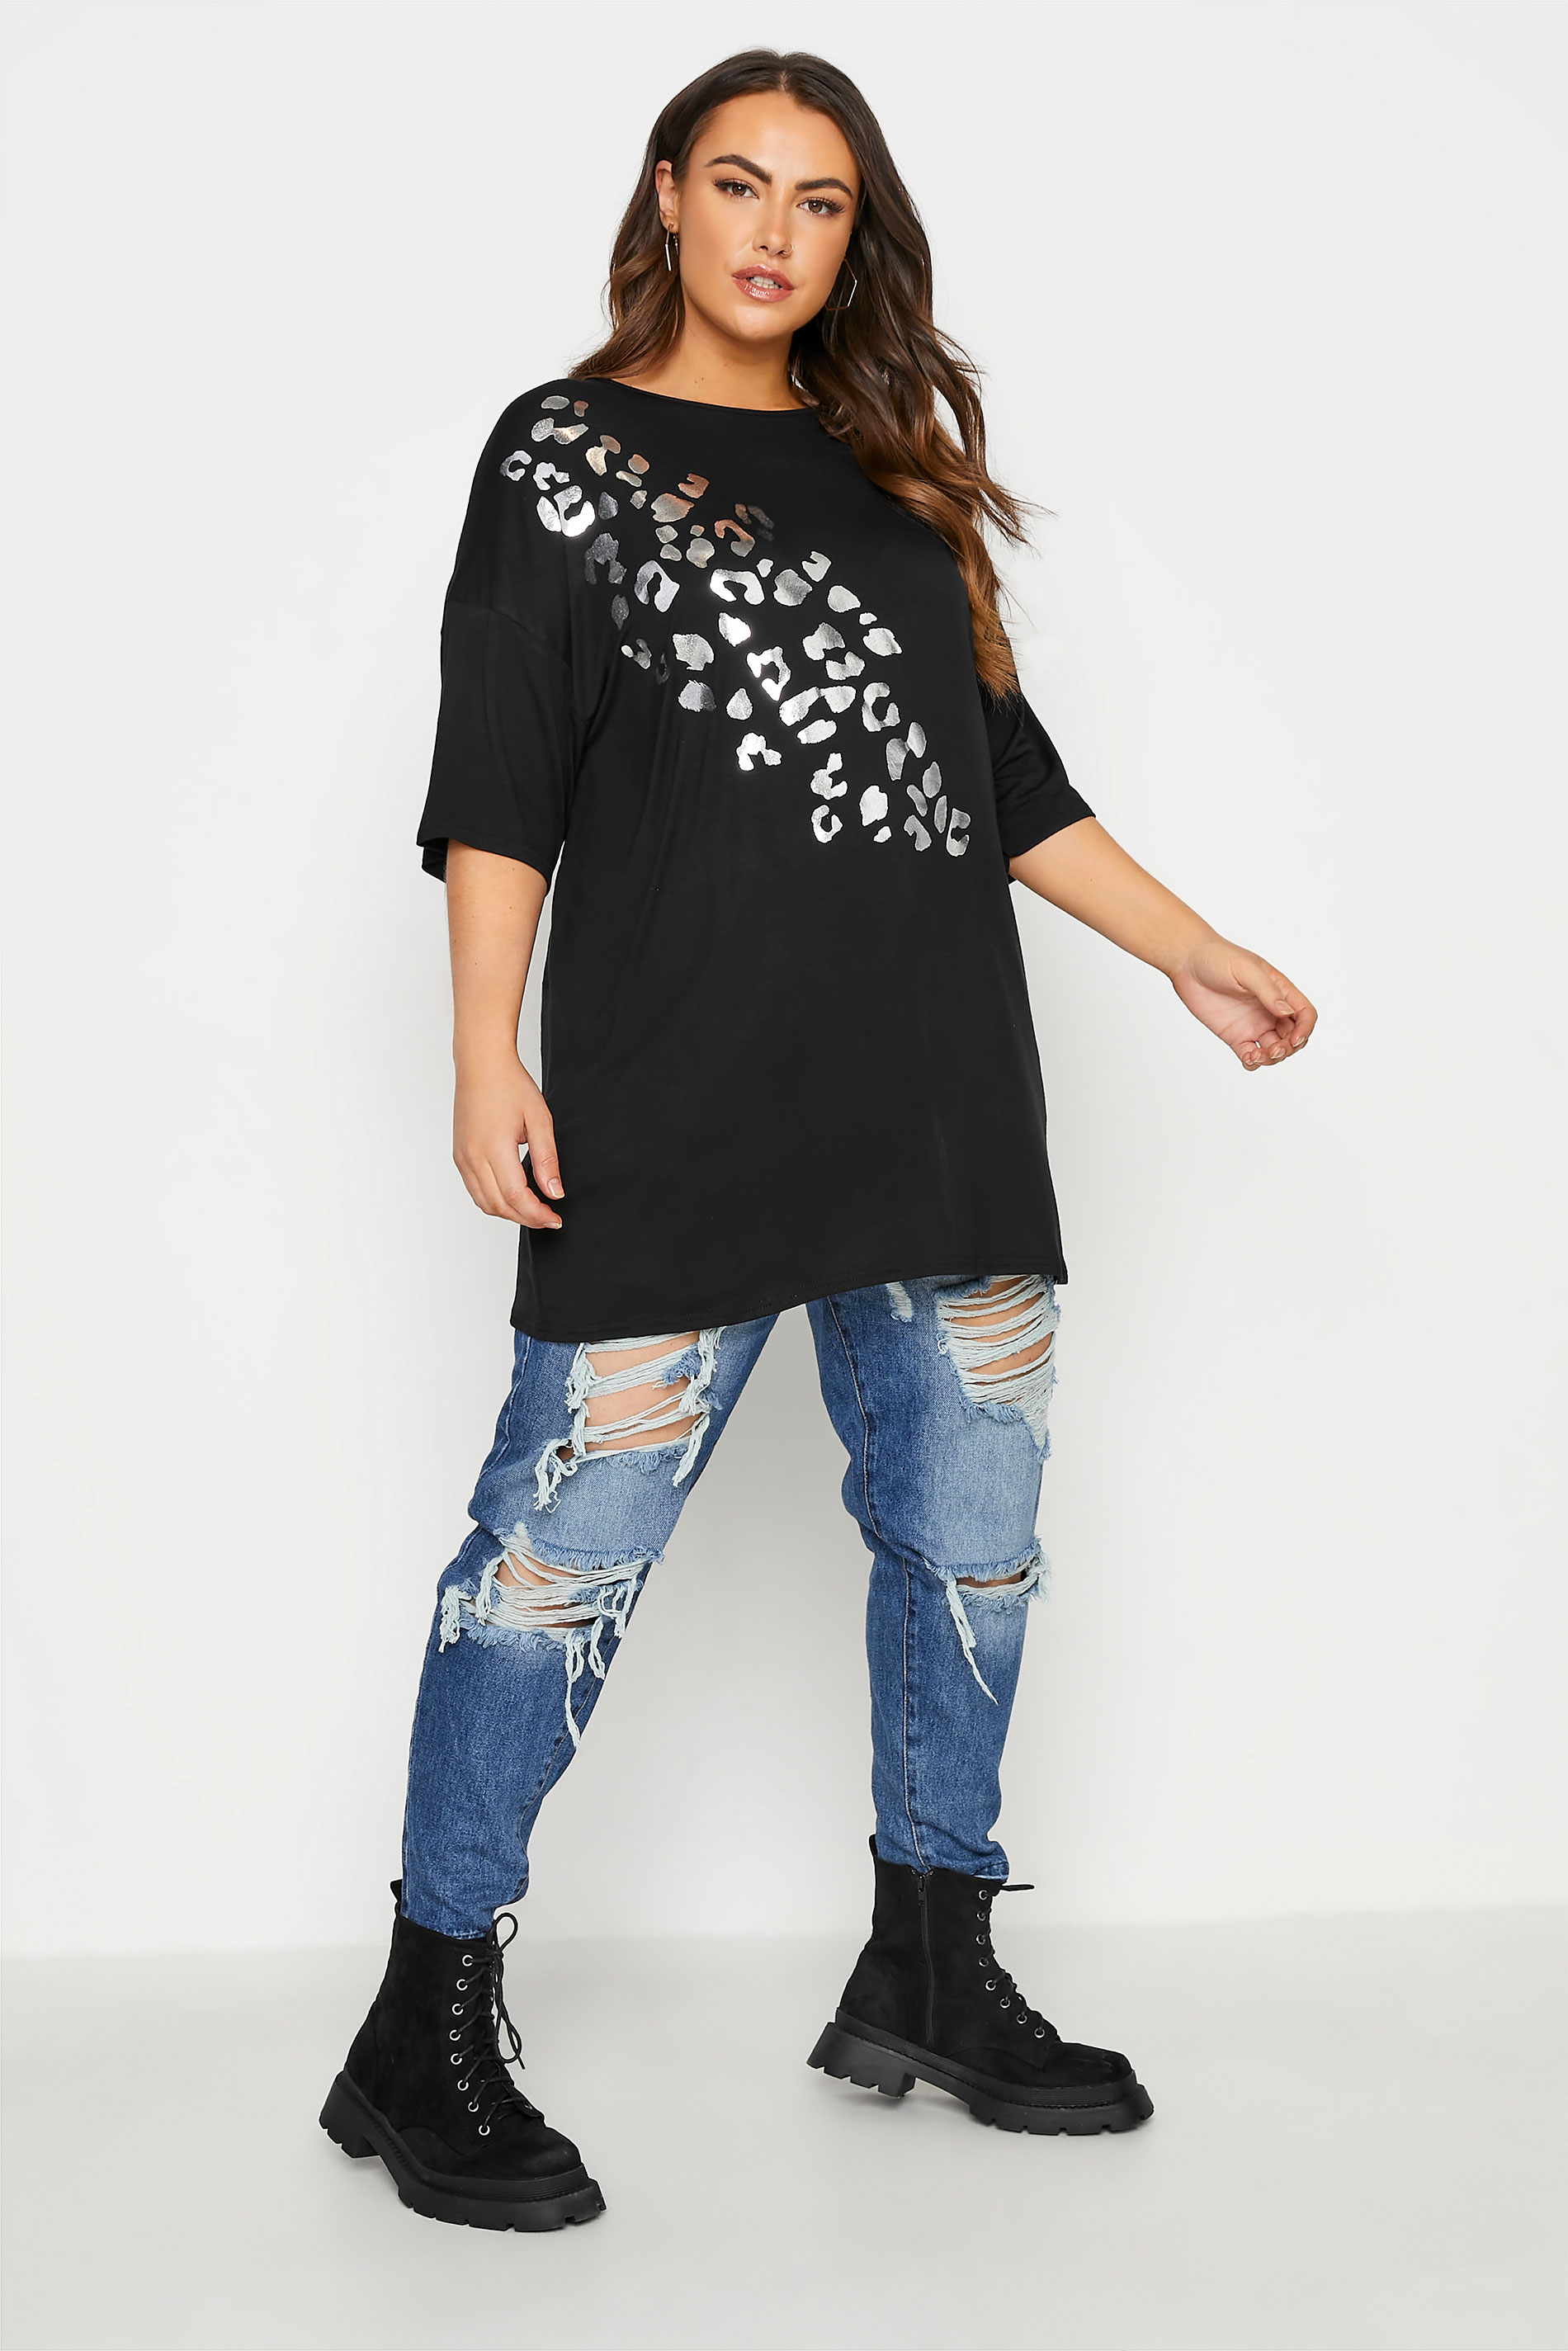 Plus Size LIMITED COLLECTION Black Foil Leopard Print Oversized T-Shirt | Yours Clothing  2